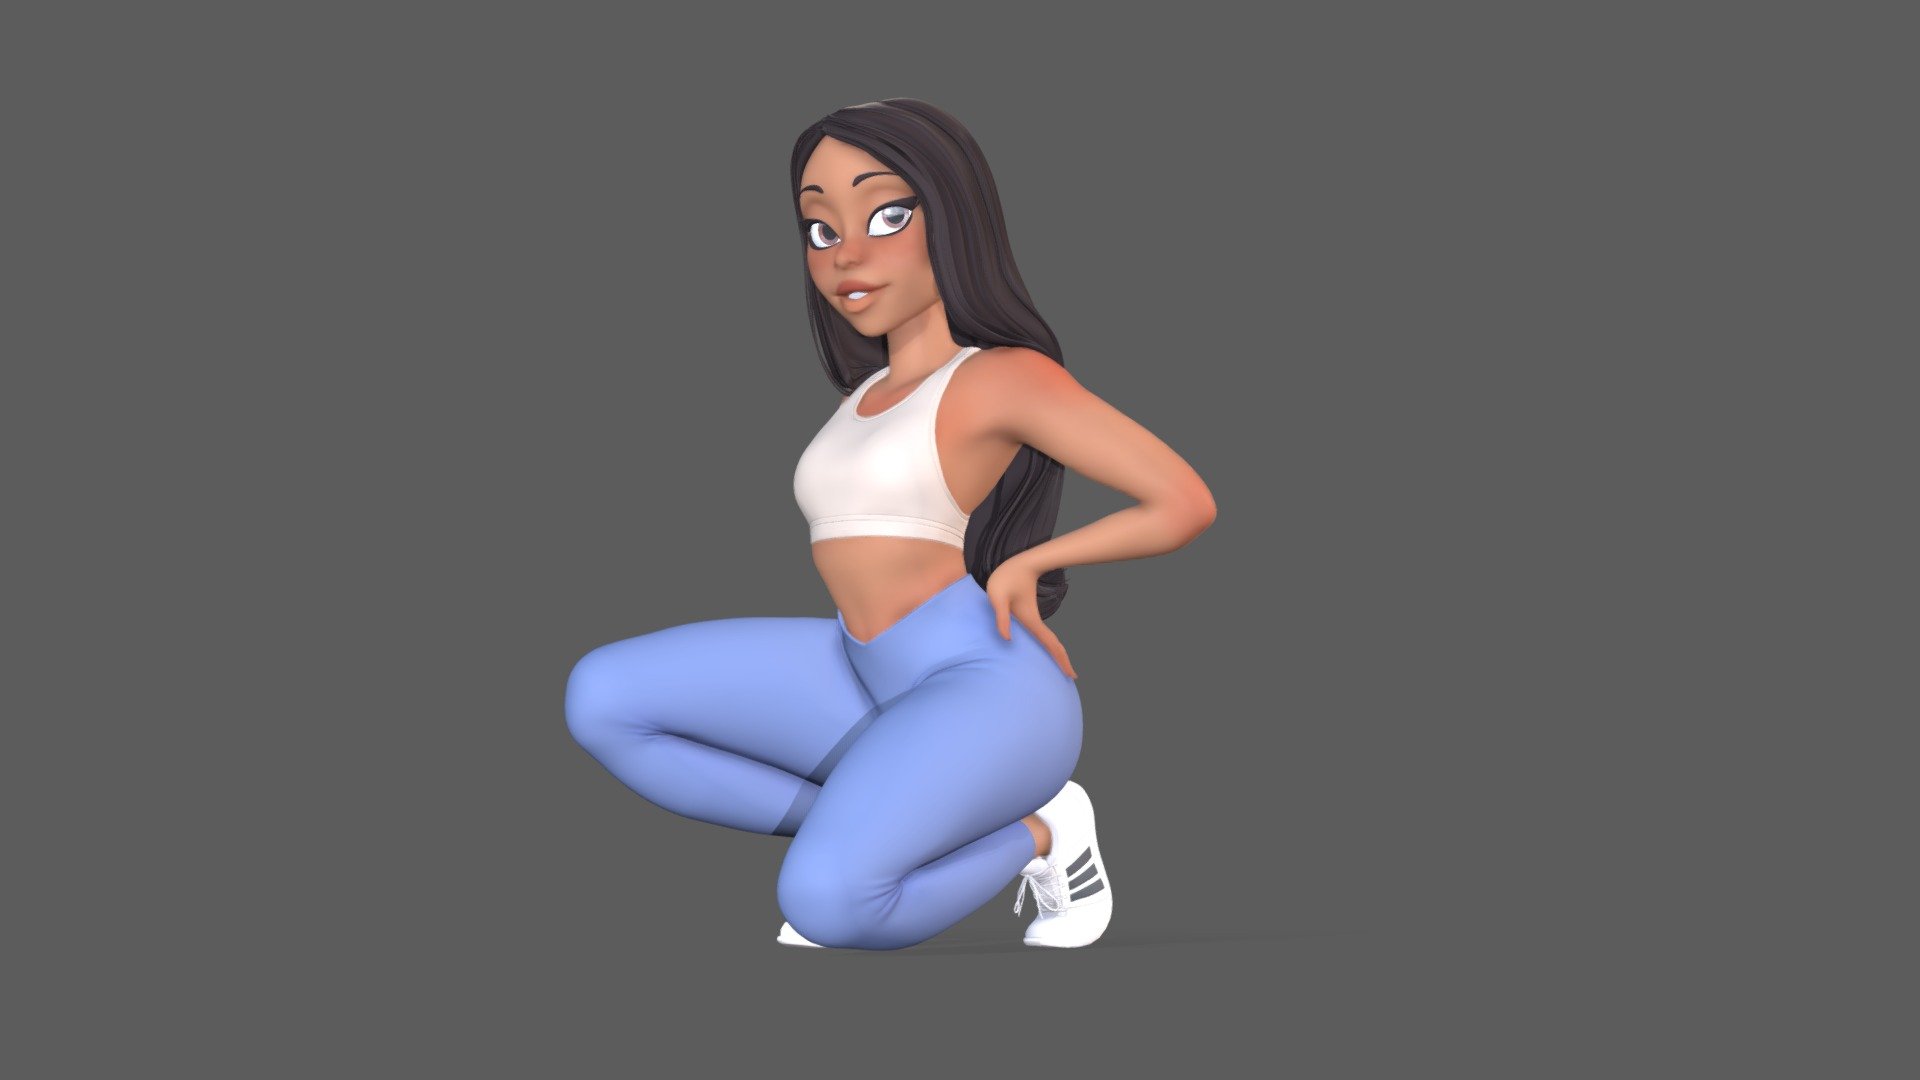 Based on art by Karoline Pietrowski.  No textures, just vertex colors.

https://karolinepietrowski.tumblr.com/post/648814921341140992/new-drawing-tutorial-how-i-draw-bodies-is-up-on - Fitness Model - 3D model by roto (@rotoslinger) 3d model